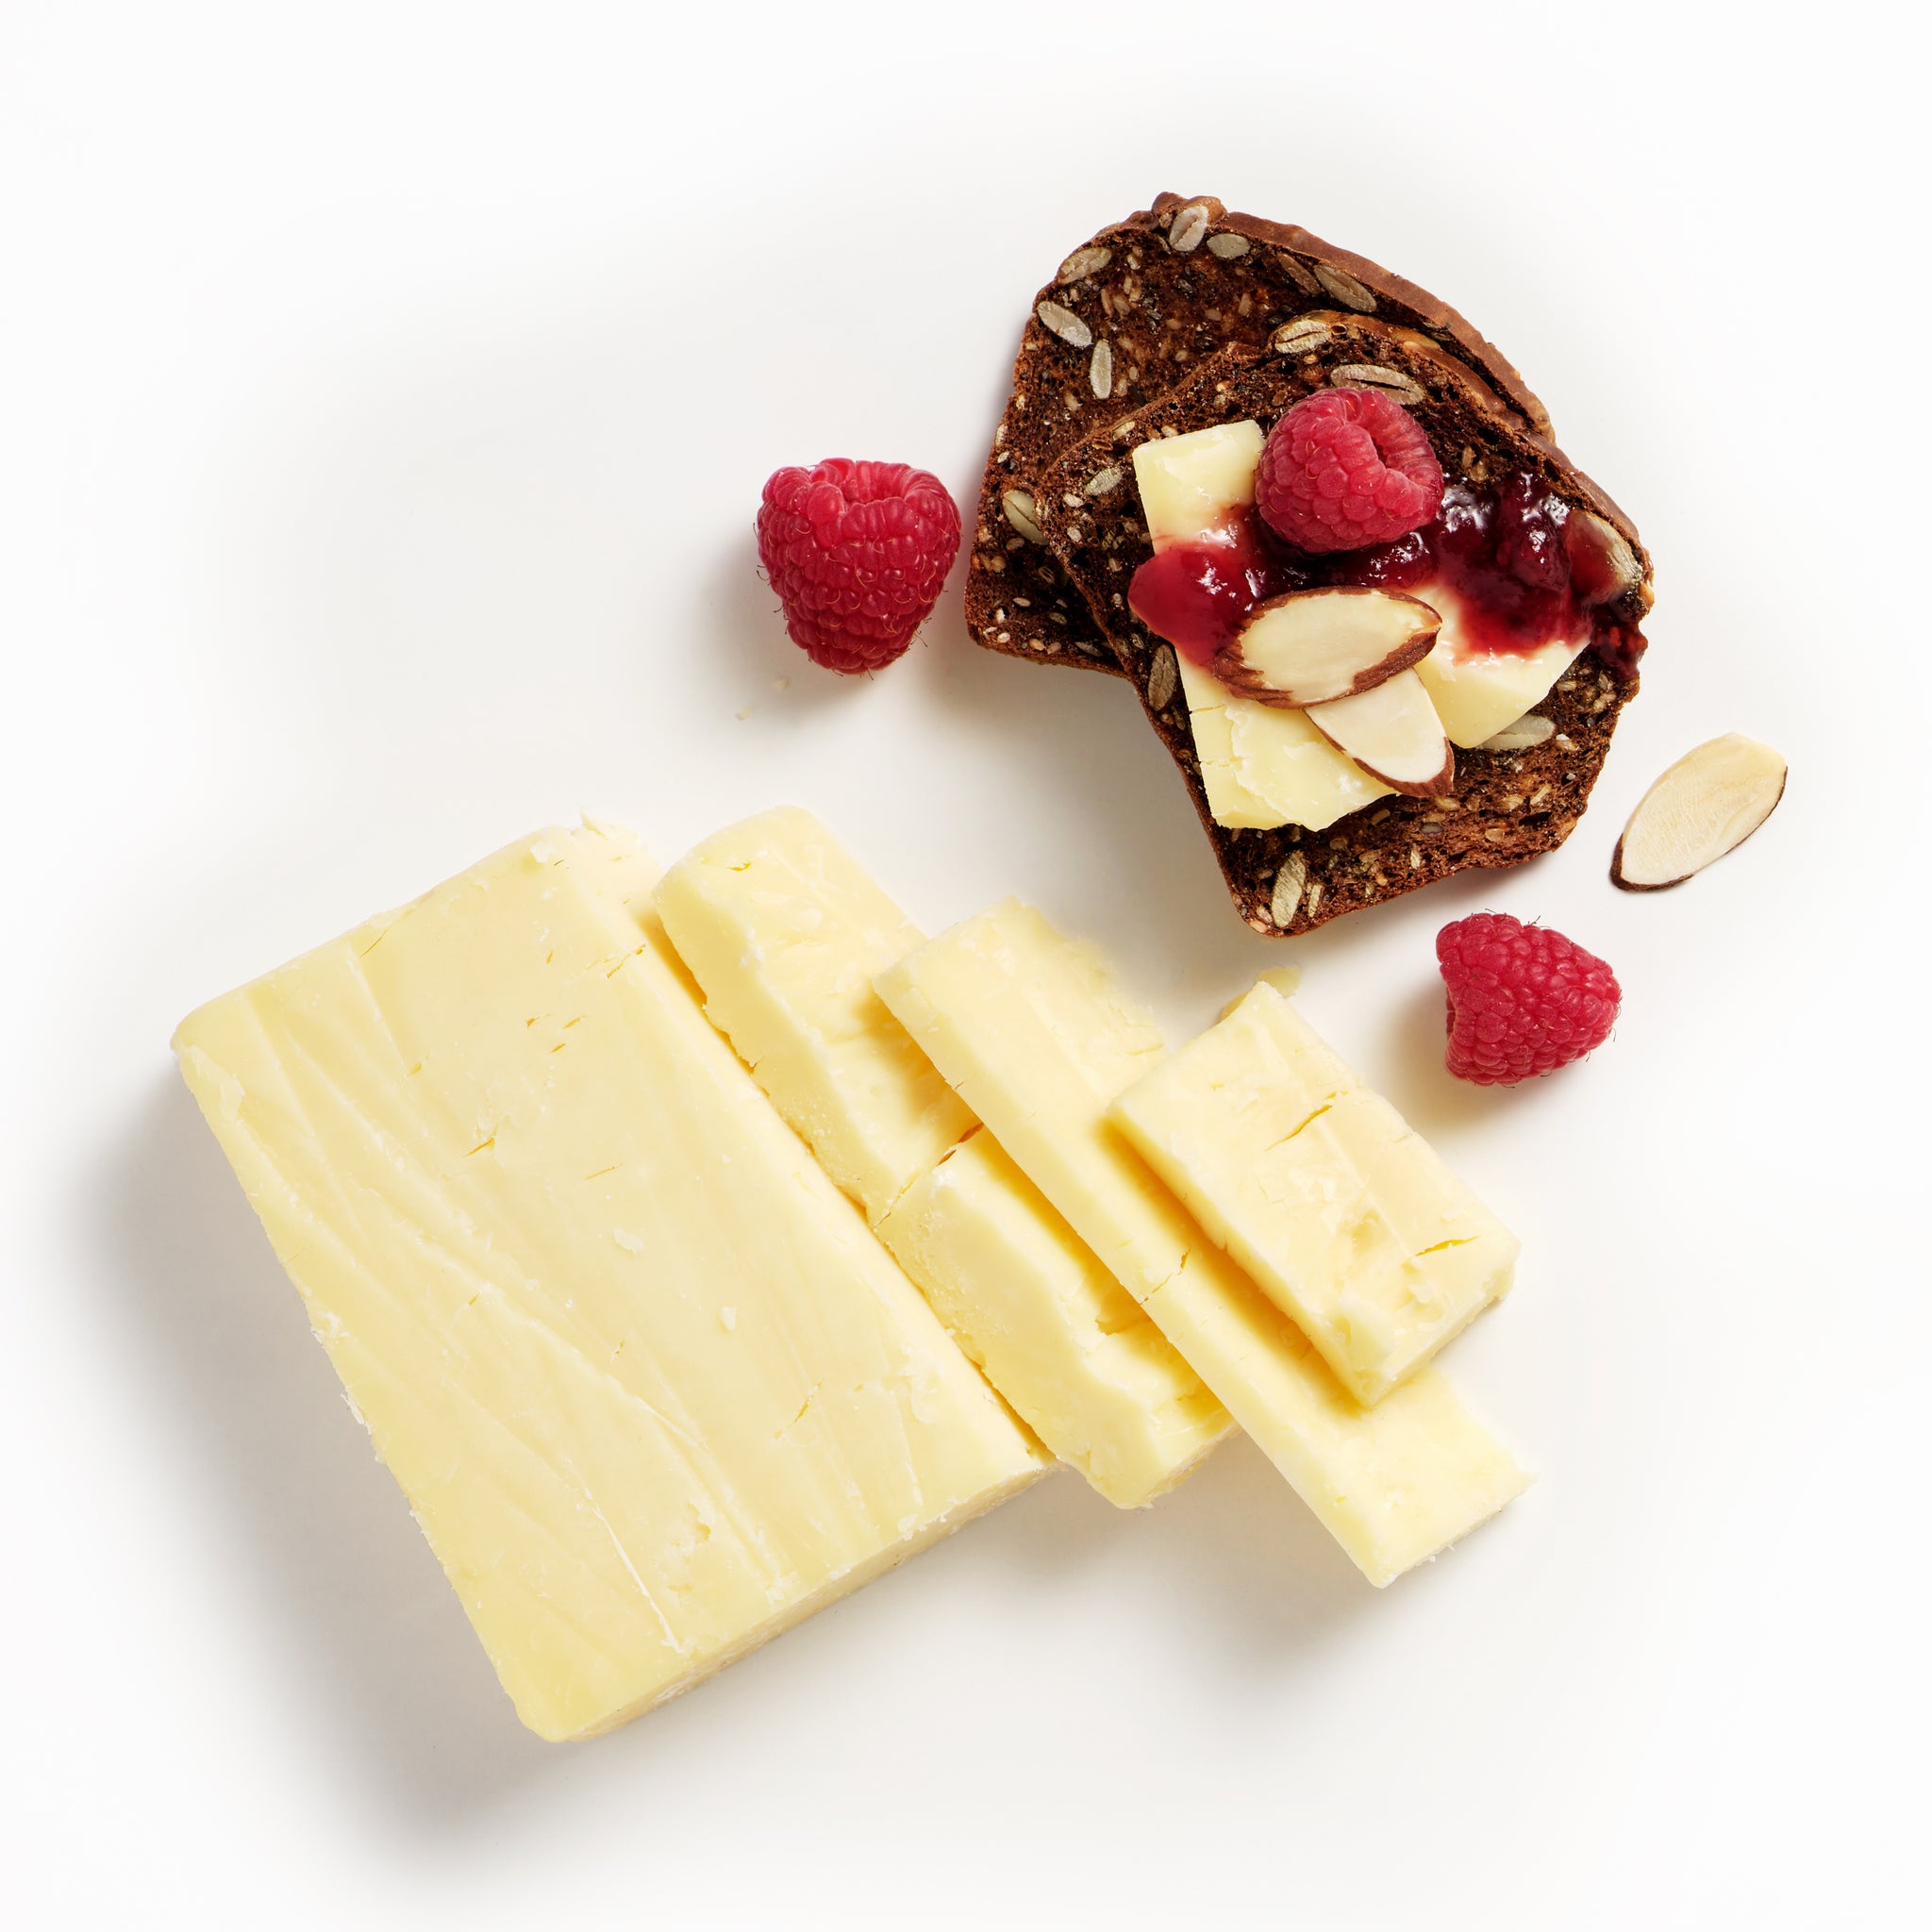 Cathedral City Vintage Cheddar Cheese on a Raincoast cracker with fresh raspberries and slivered almonds. 